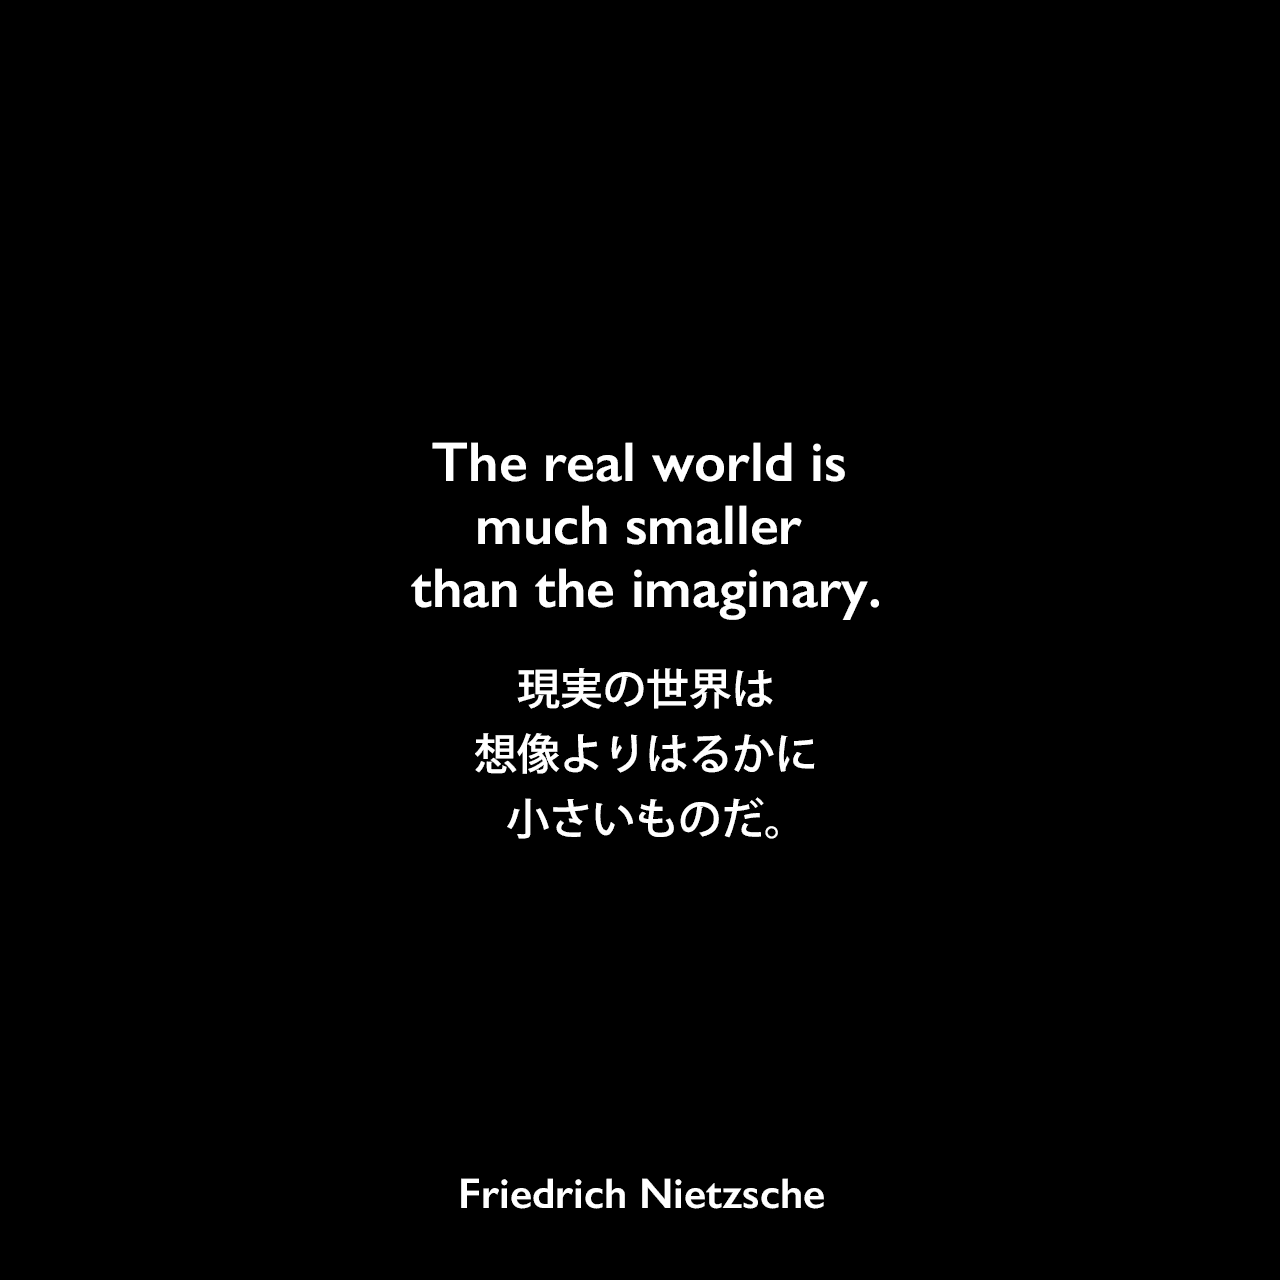 The real world is much smaller than the imaginary.現実の世界は、想像よりはるかに小さいものだ。Friedrich Nietzsche